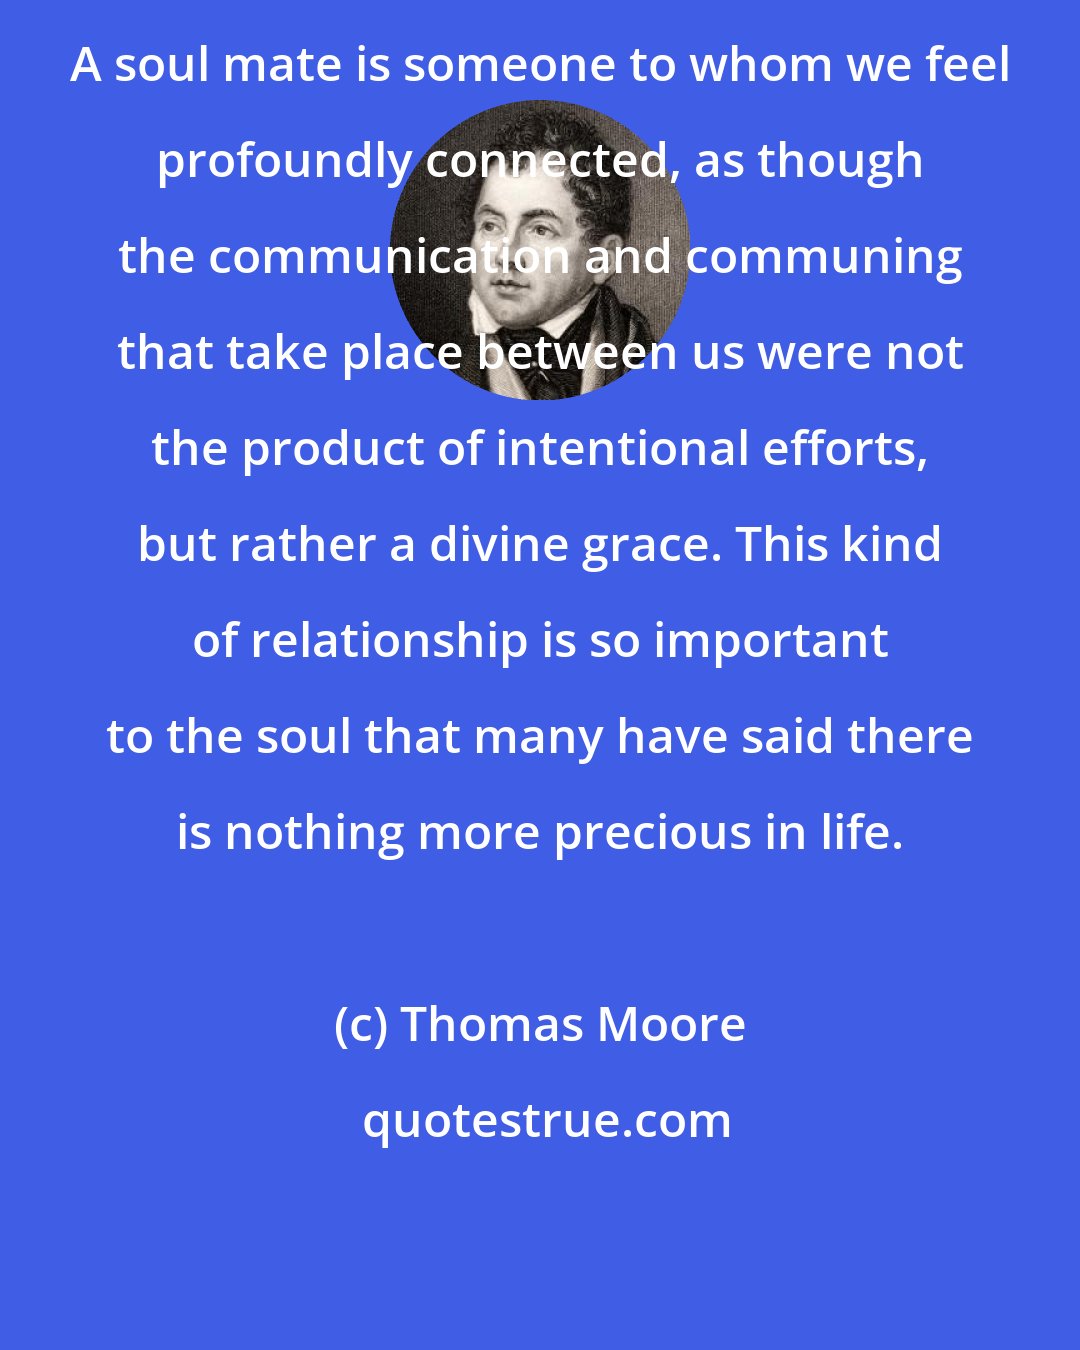 Thomas Moore: A soul mate is someone to whom we feel profoundly connected, as though the communication and communing that take place between us were not the product of intentional efforts, but rather a divine grace. This kind of relationship is so important to the soul that many have said there is nothing more precious in life.